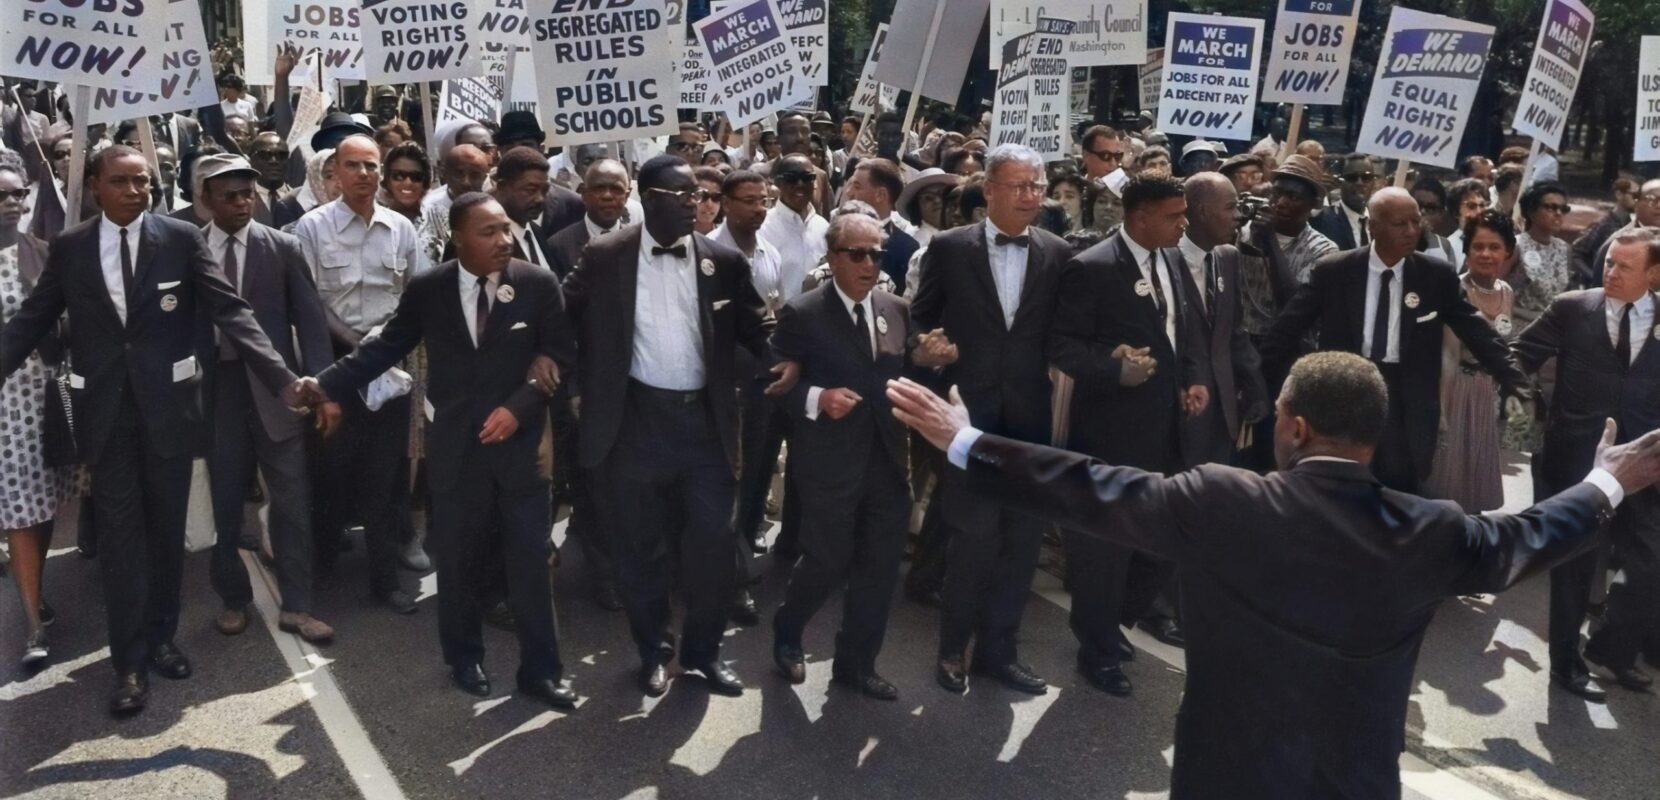 historical march to end segregation